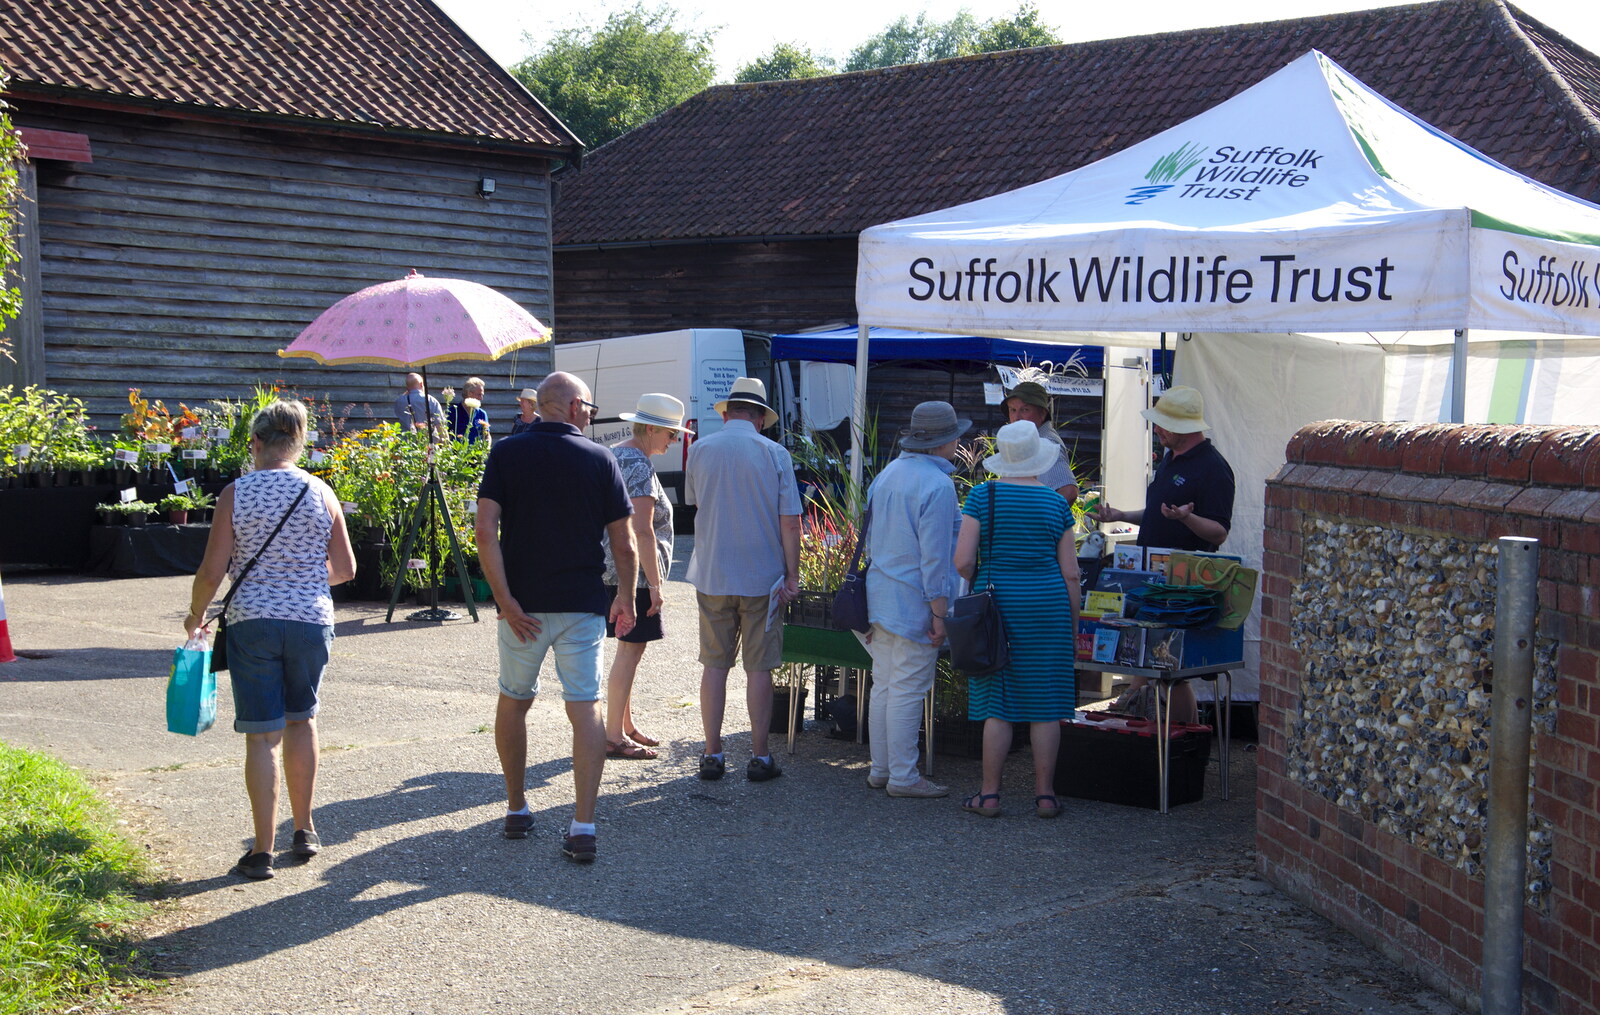 People hang around the Suffolk Wildlife Trust tent from The Gislingham Silver Band at Walsham Le Willows, Suffolk - 26th August 2019